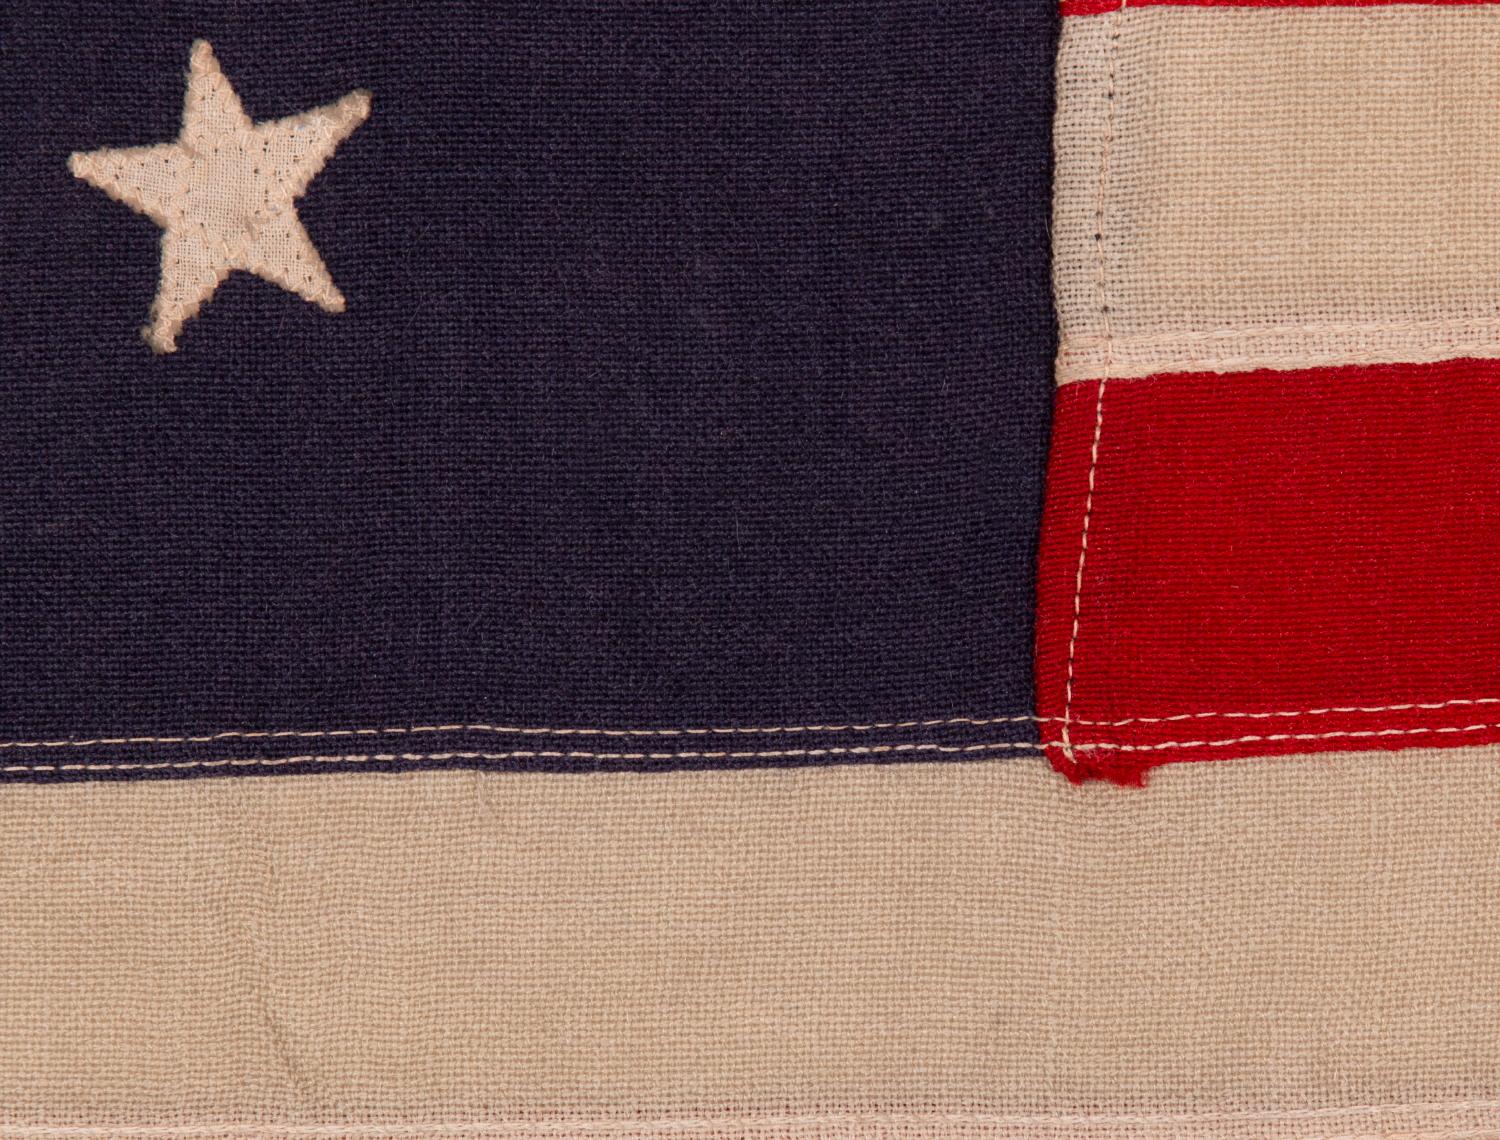 20th Century 13 Star Antique American Private Yacht Flag